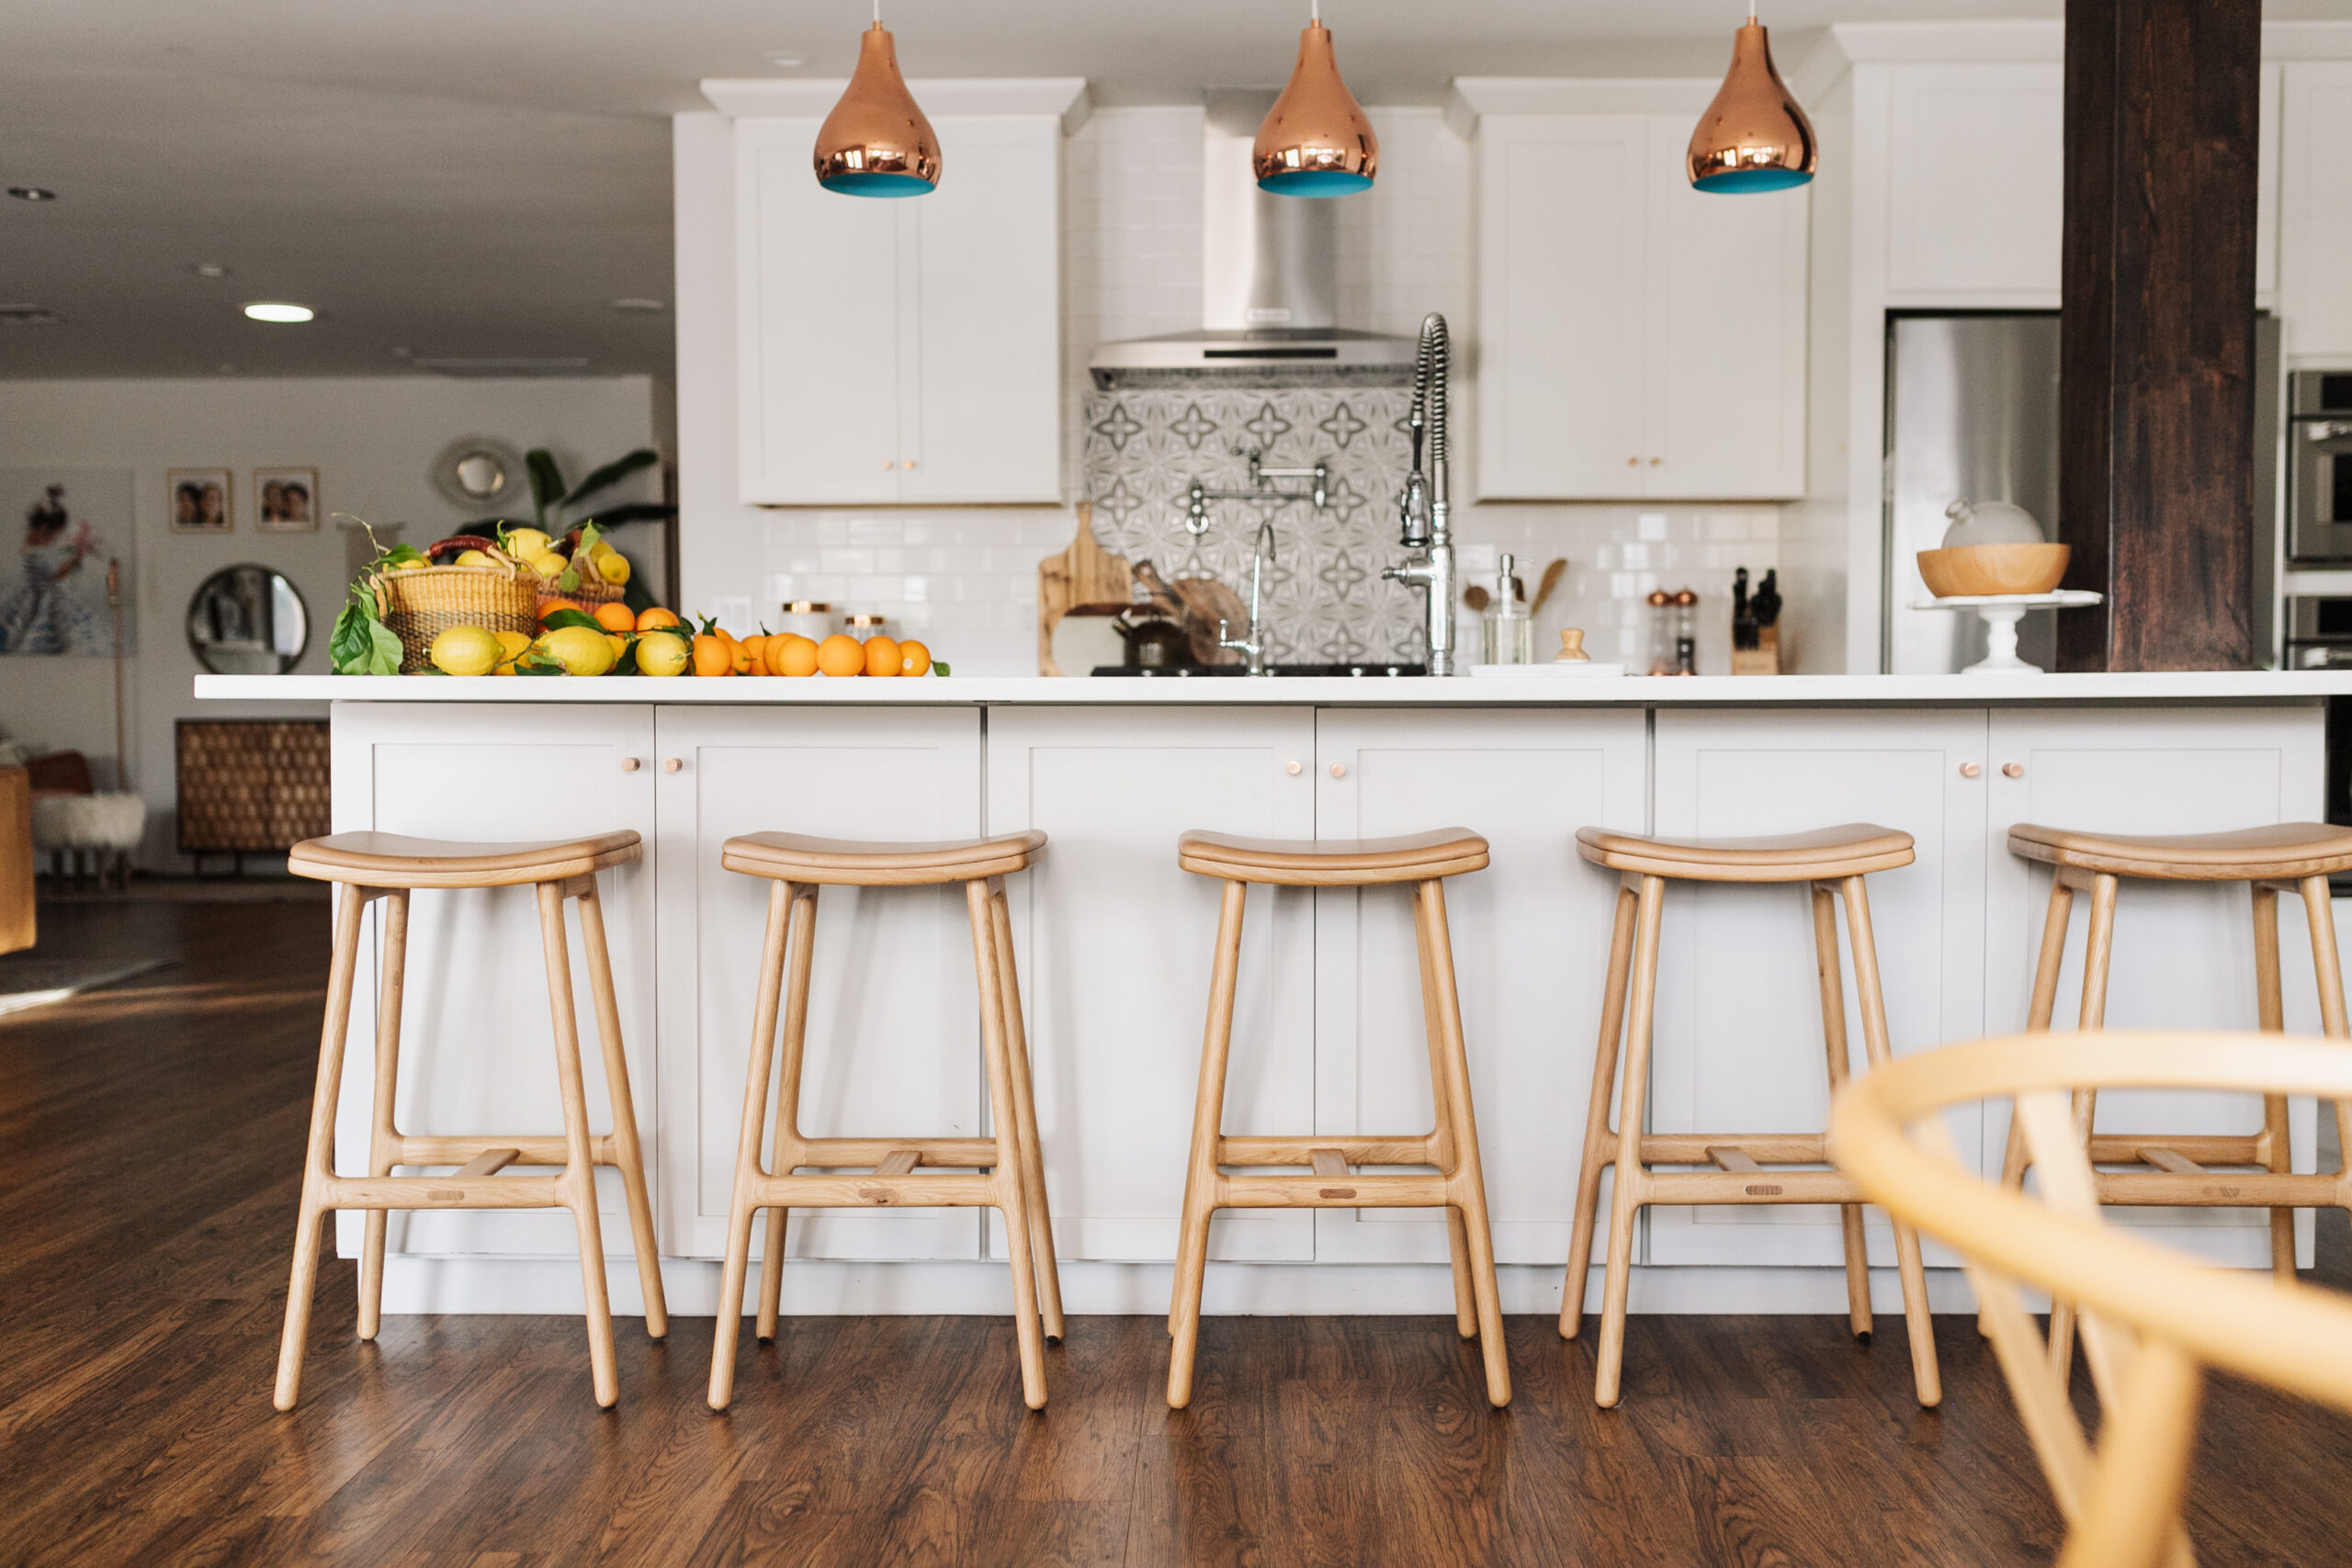 loving these modern scandinavian kitchen counter stools from Article #theldlhome #kitchenideas #kitchenisland #counterstools